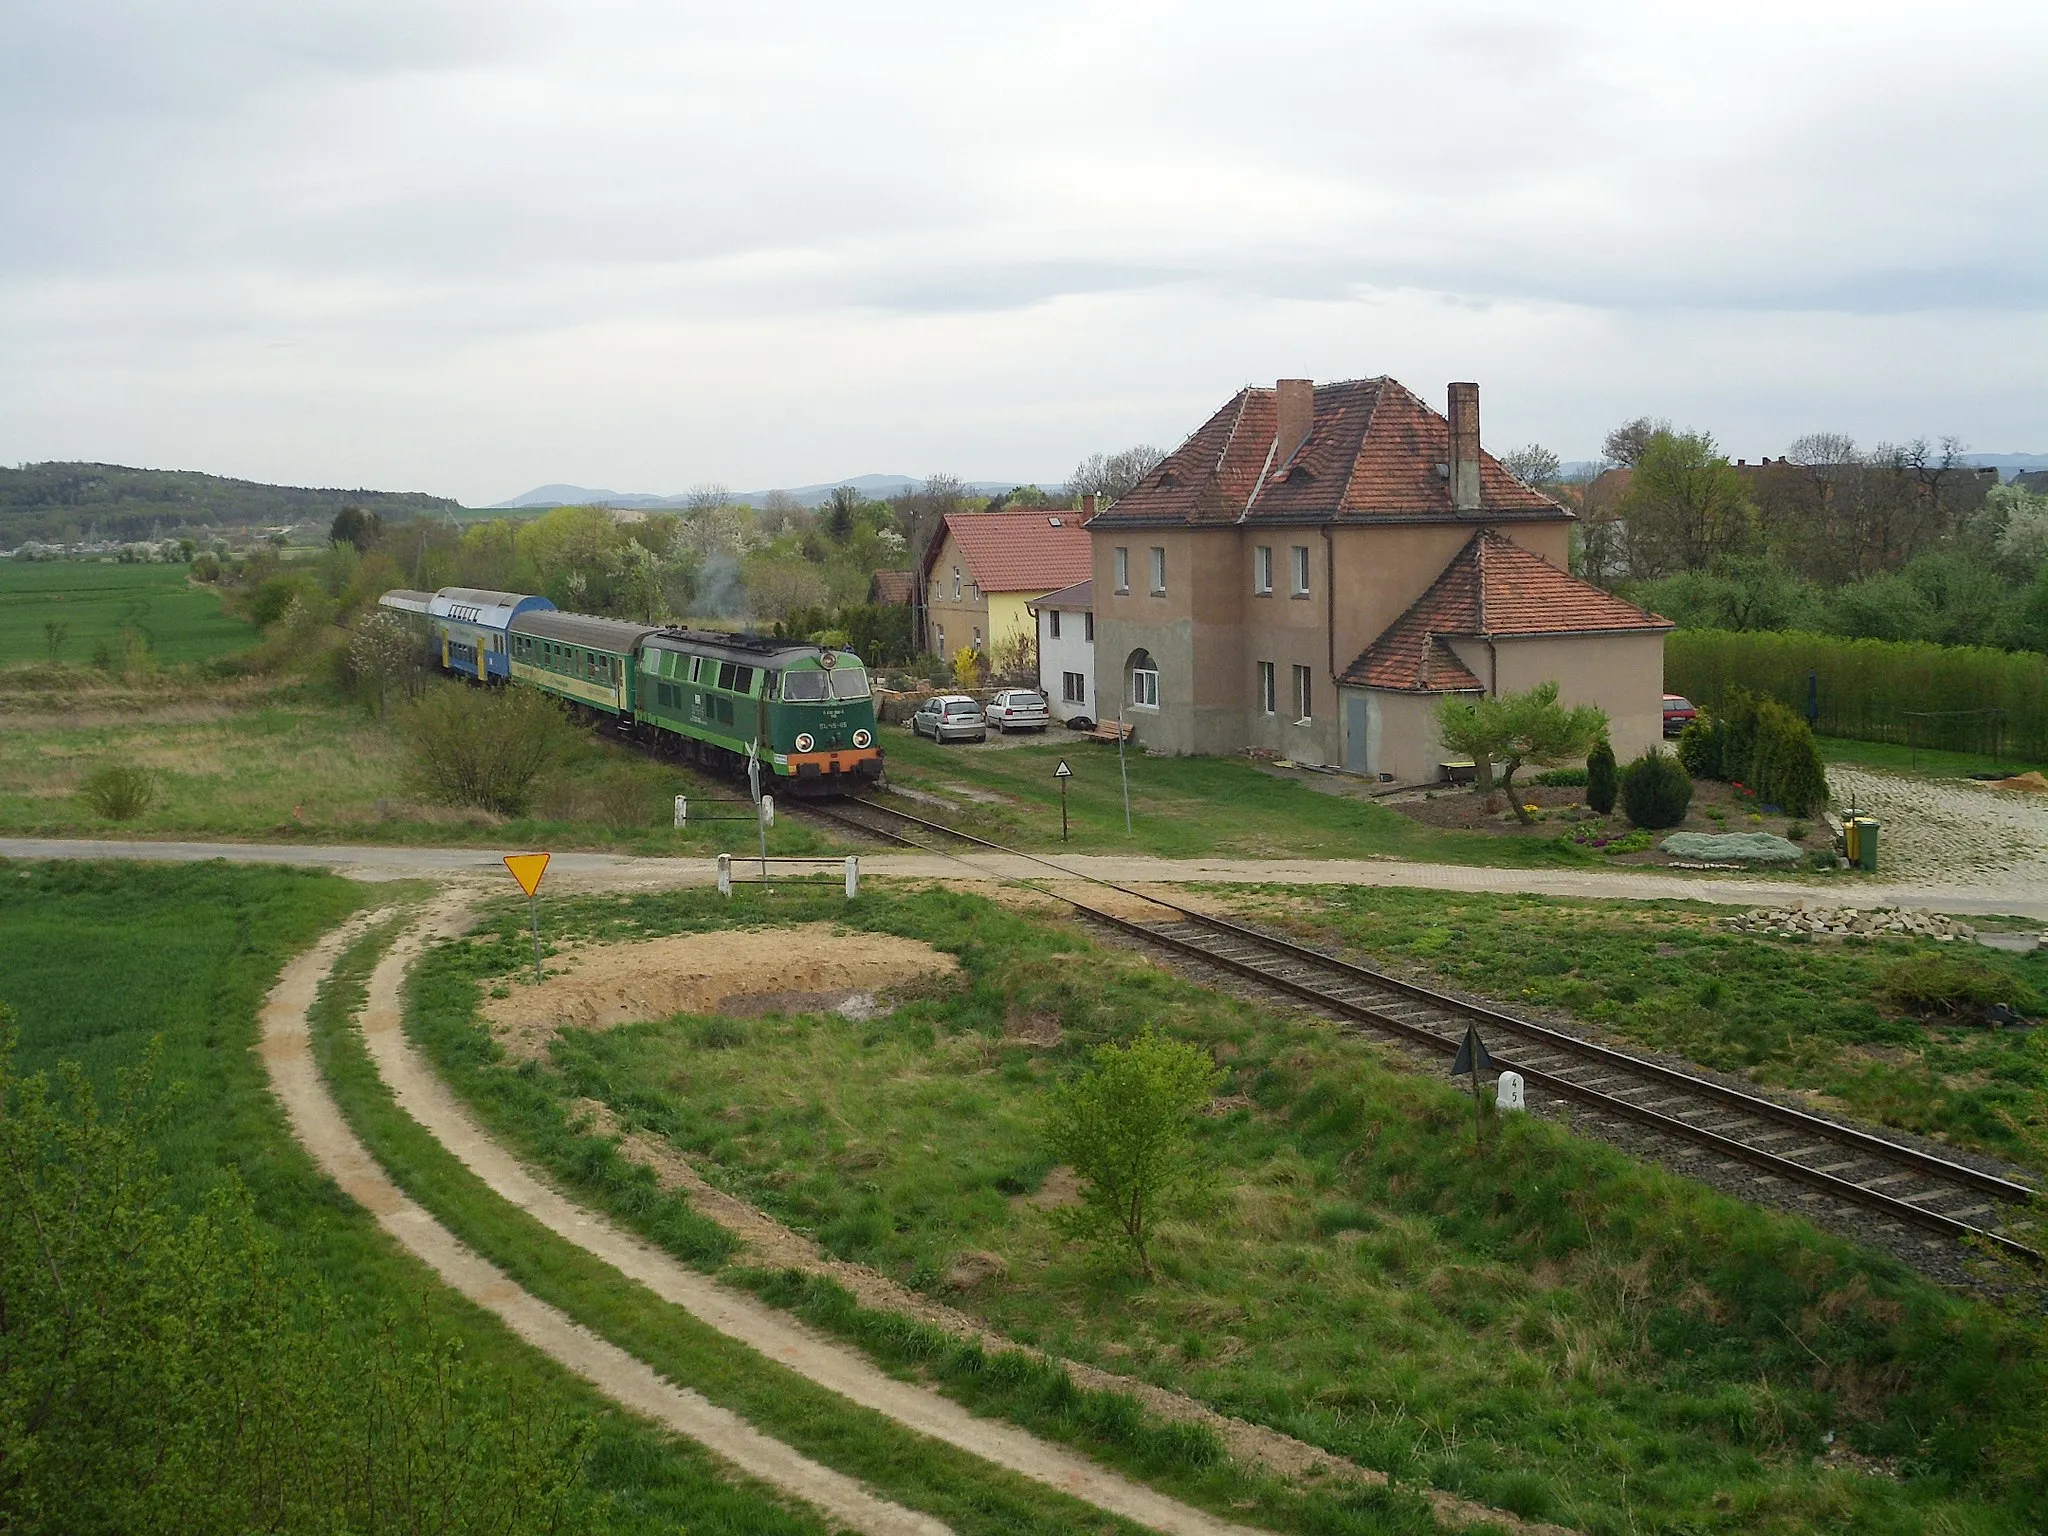 Photo showing: Tourist train headed by a diesel engine SU45-115 in front of a former station building in Siekierzice, Poland, on a freight line from Jawor. The train is heading towards Jawor and the picture was taken from a road bridge.